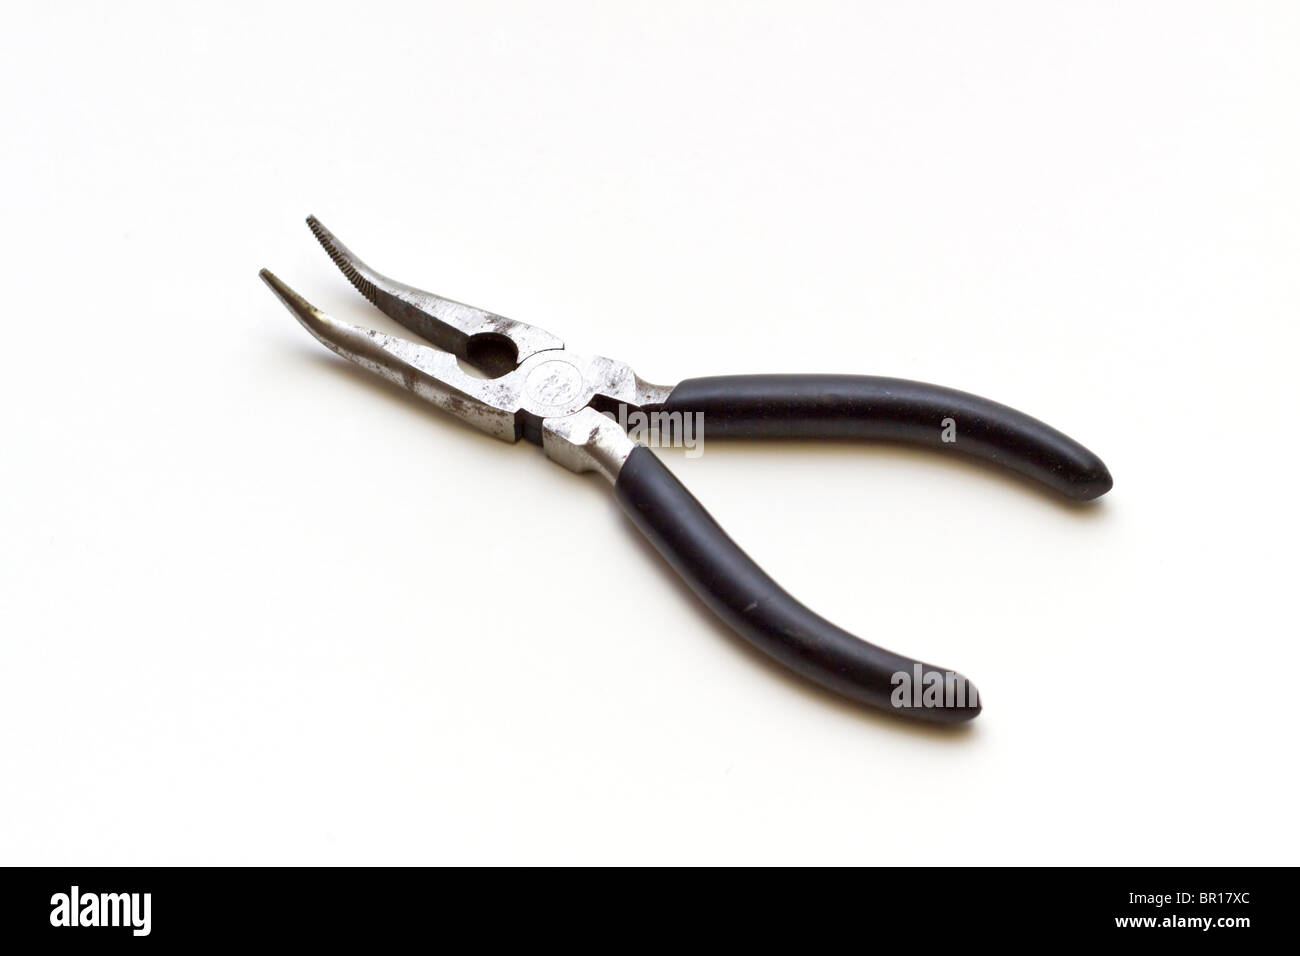 Curved needle-nose pliers with a black insulated grip Stock Photo